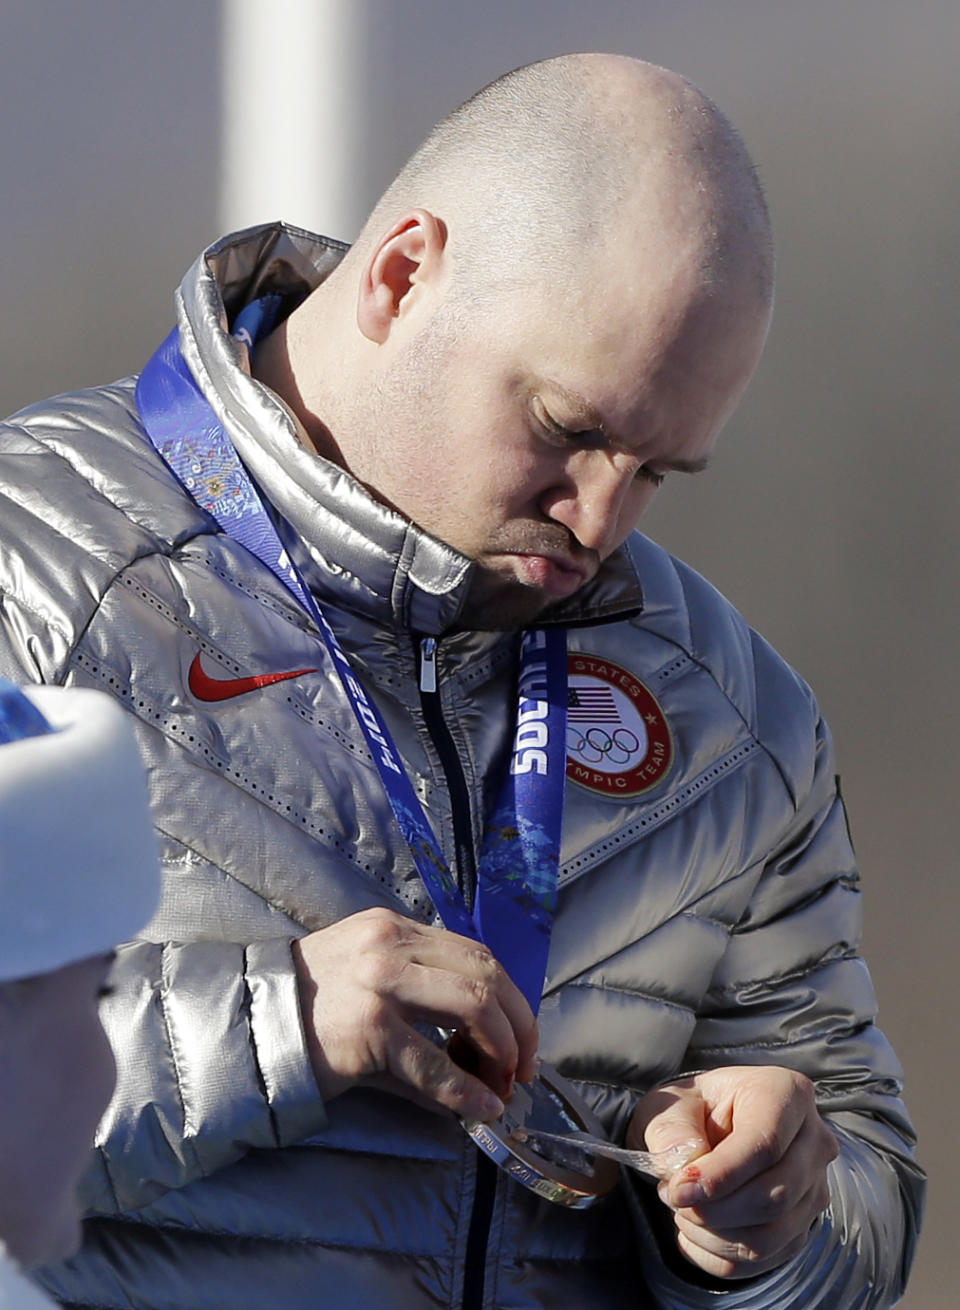 The team driver of United States USA-1, Steven Holcomb, looks at his bronze medal after the men's four-man bobsled competition final at the 2014 Winter Olympics, Sunday, Feb. 23, 2014, in Krasnaya Polyana, Russia. (AP Photo/Natacha Pisarenko)